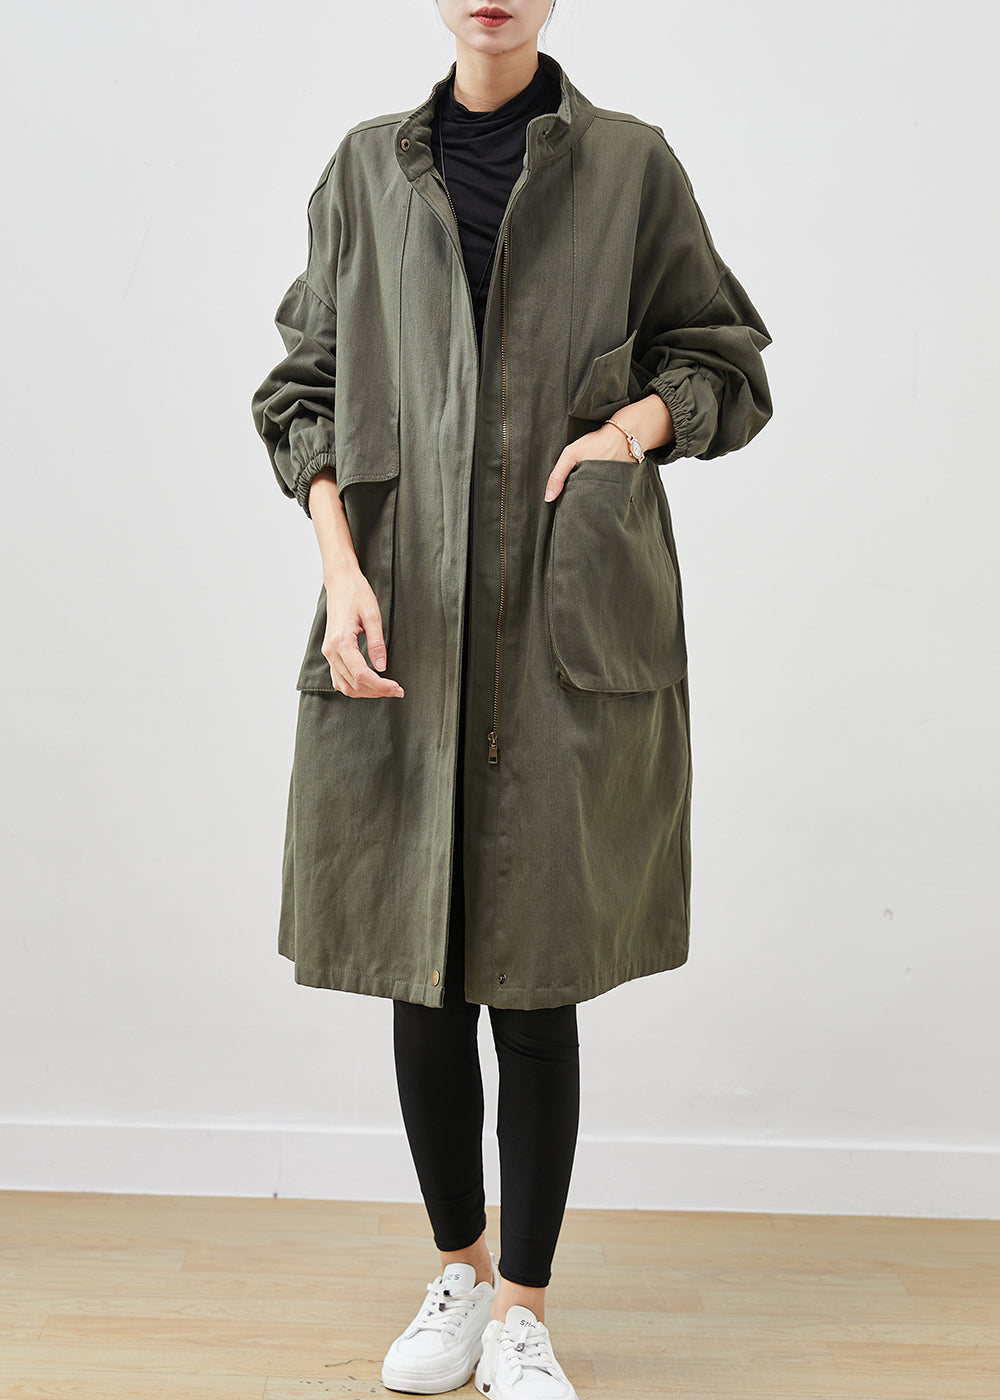 Classy Army Green Oversized Pockets Cotton Coat Outwear Spring